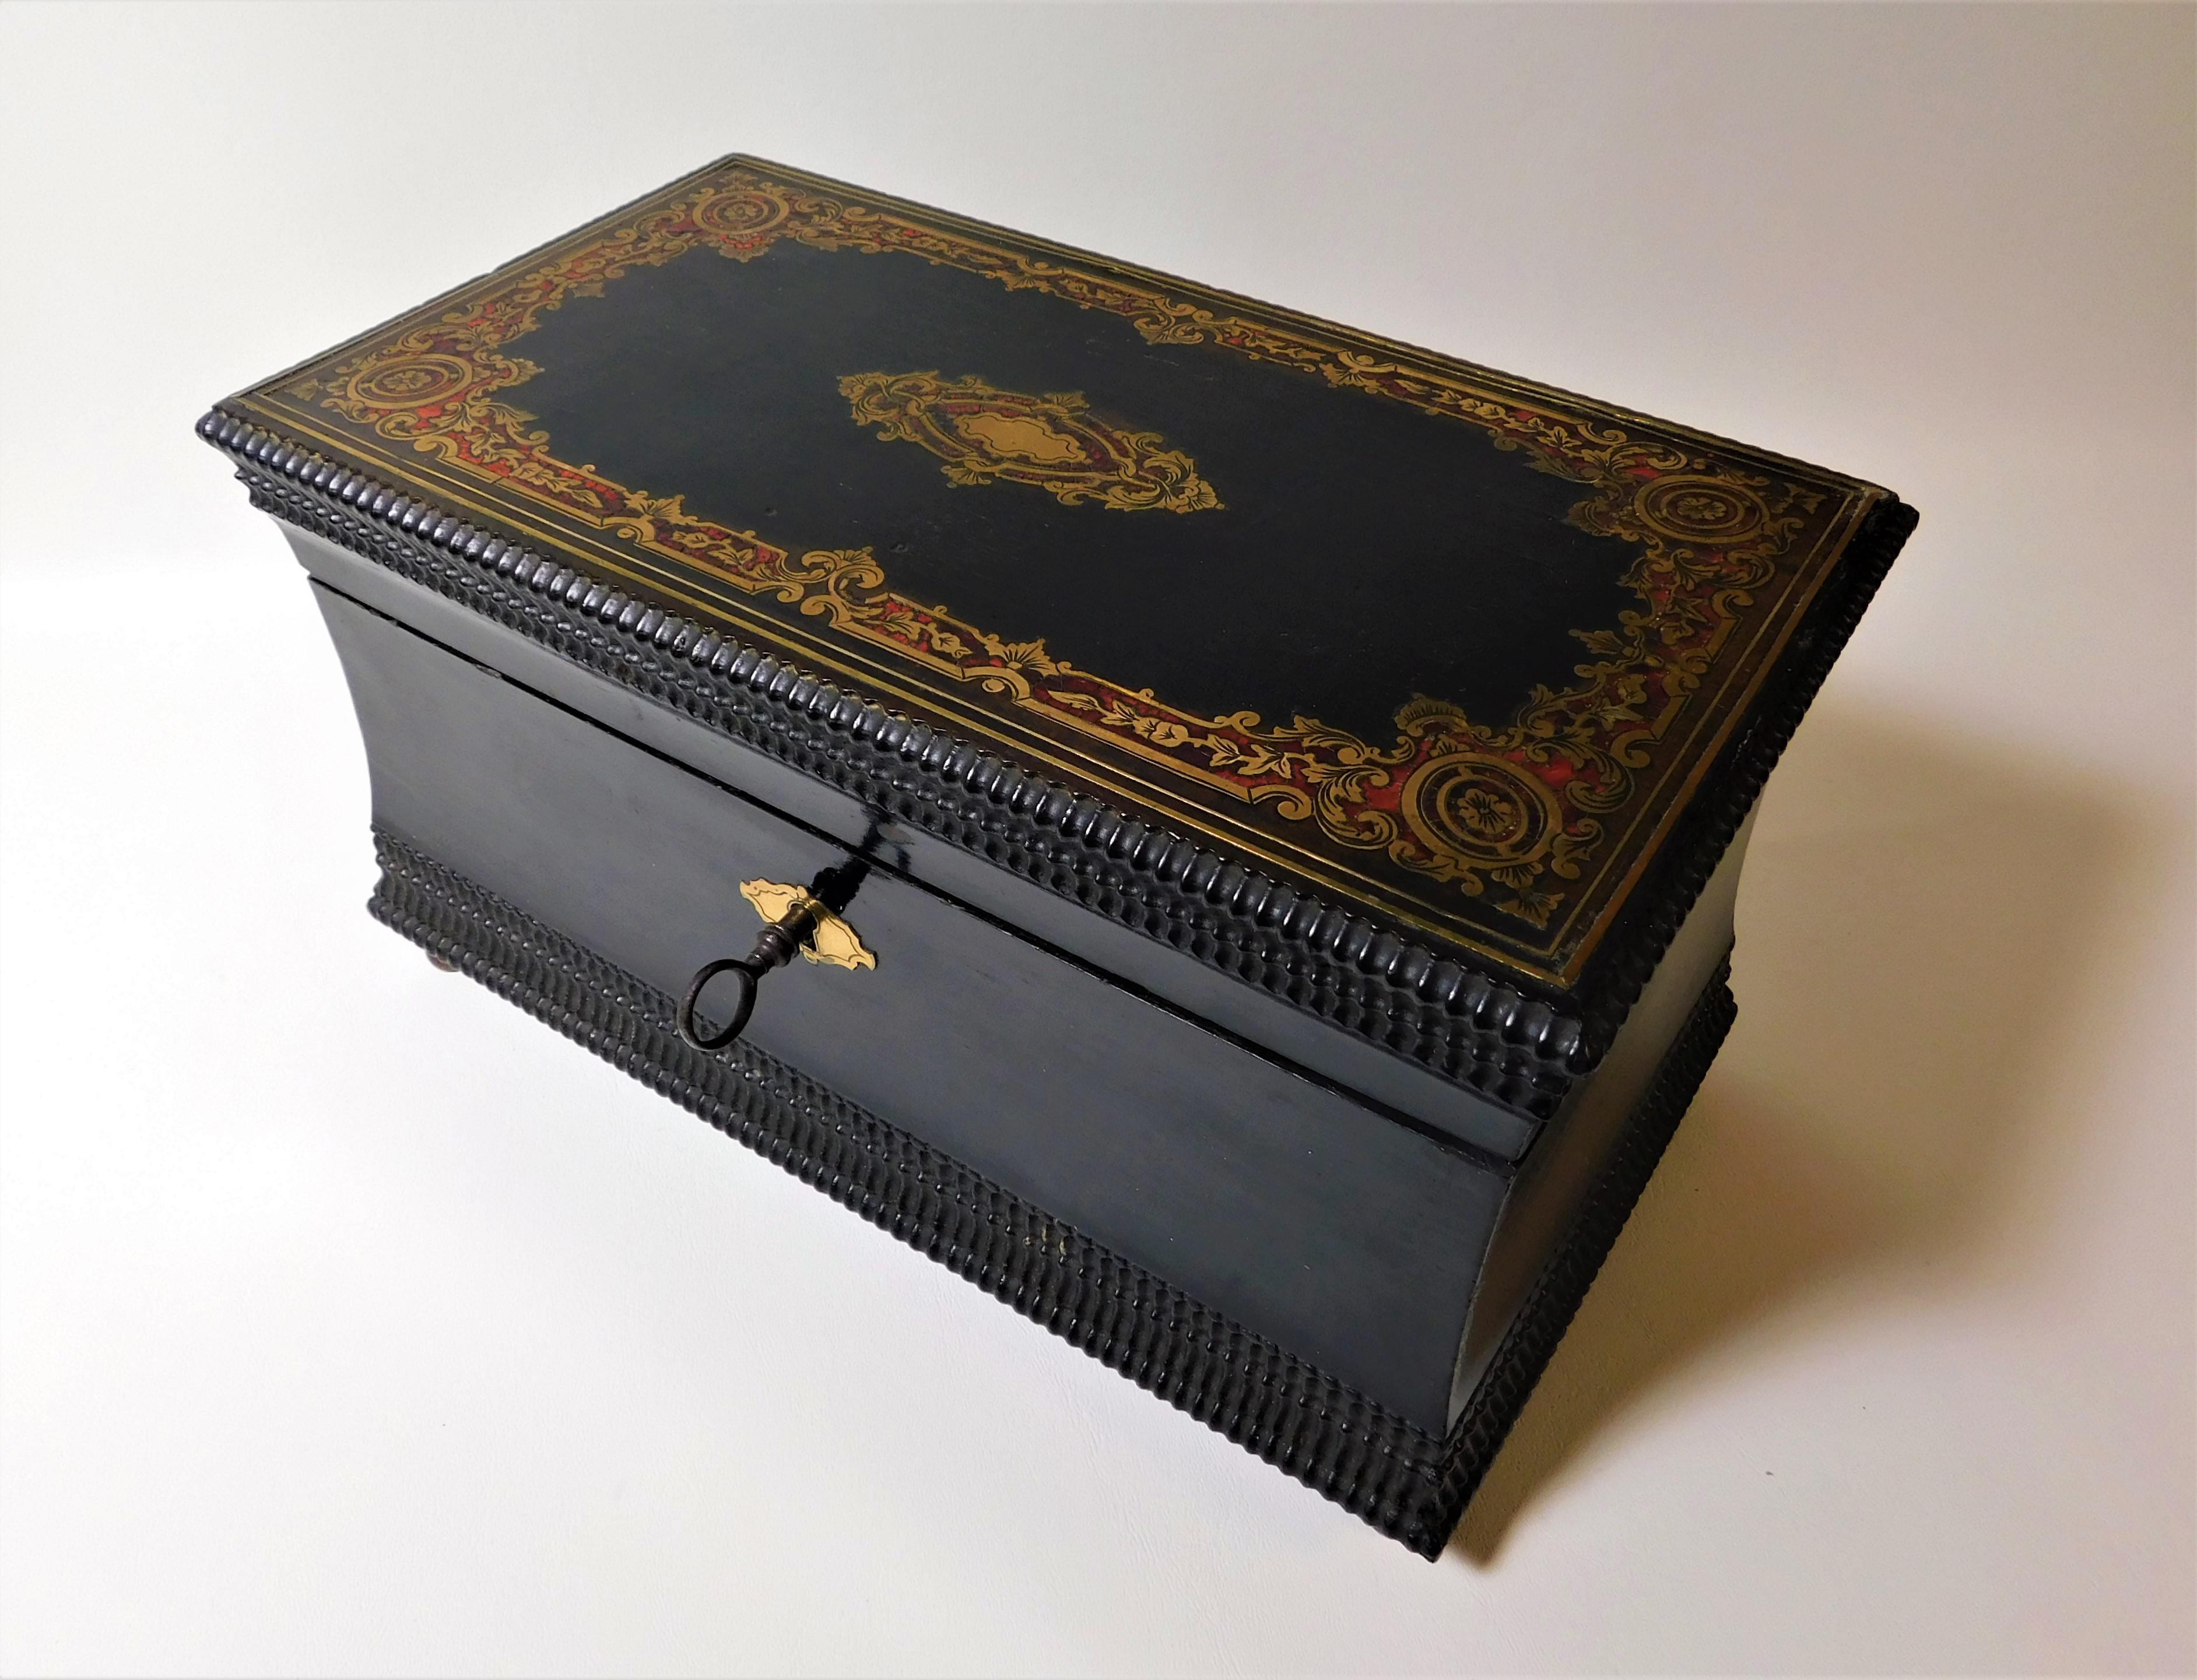 Early Victorian English Antique Victorian Ebonized Cigar Box with Brass Colored Inlay Lock Key